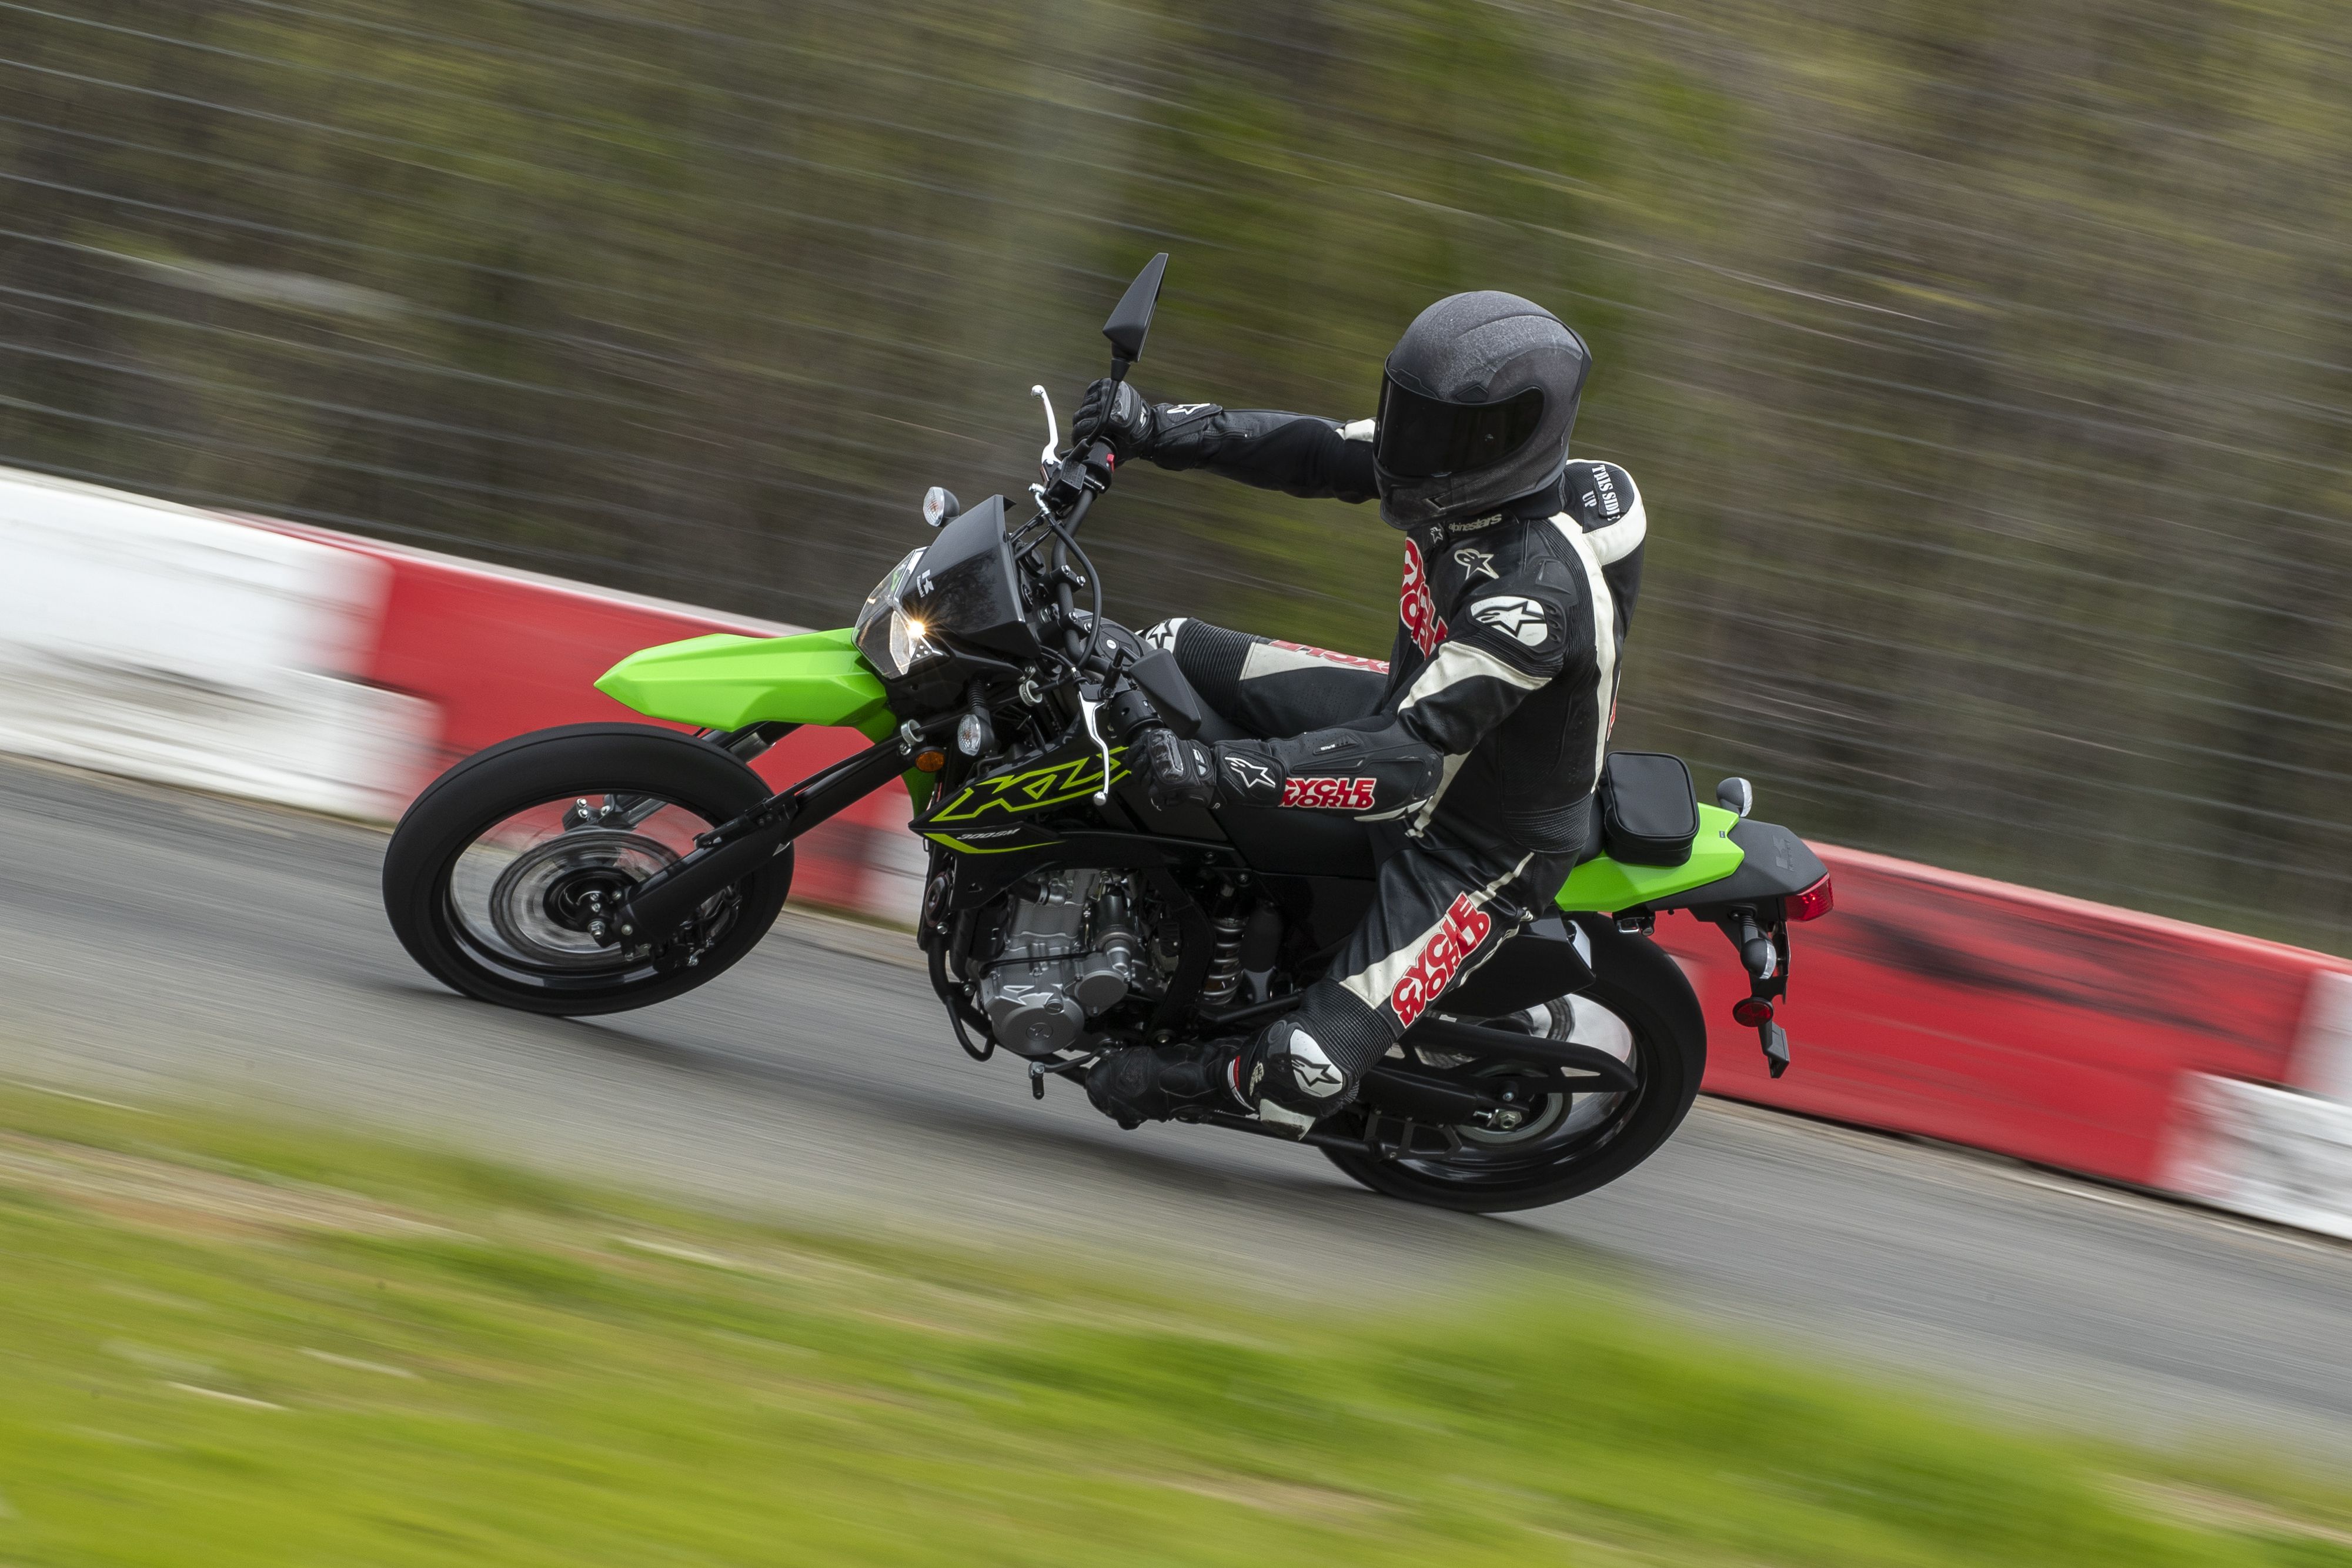 Kawasaki has two choices for street-legal small-bore fun based on the KLX300R: the  supermoto-syled KLX300SM shown here and the KLX300 dual sport.